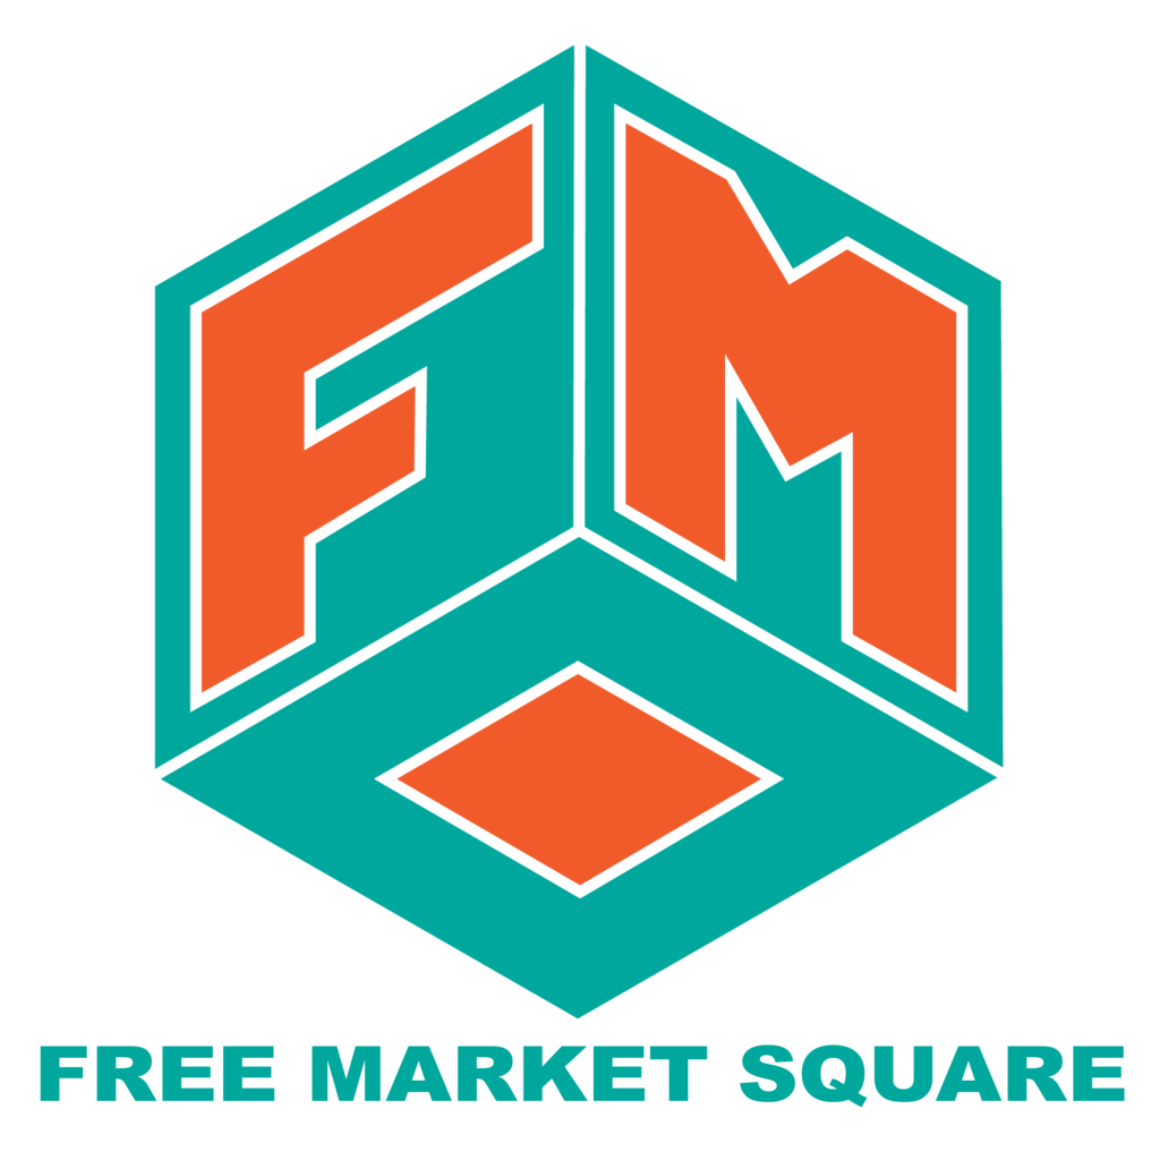 Vendor Opportunity Free Market Square February + March Events